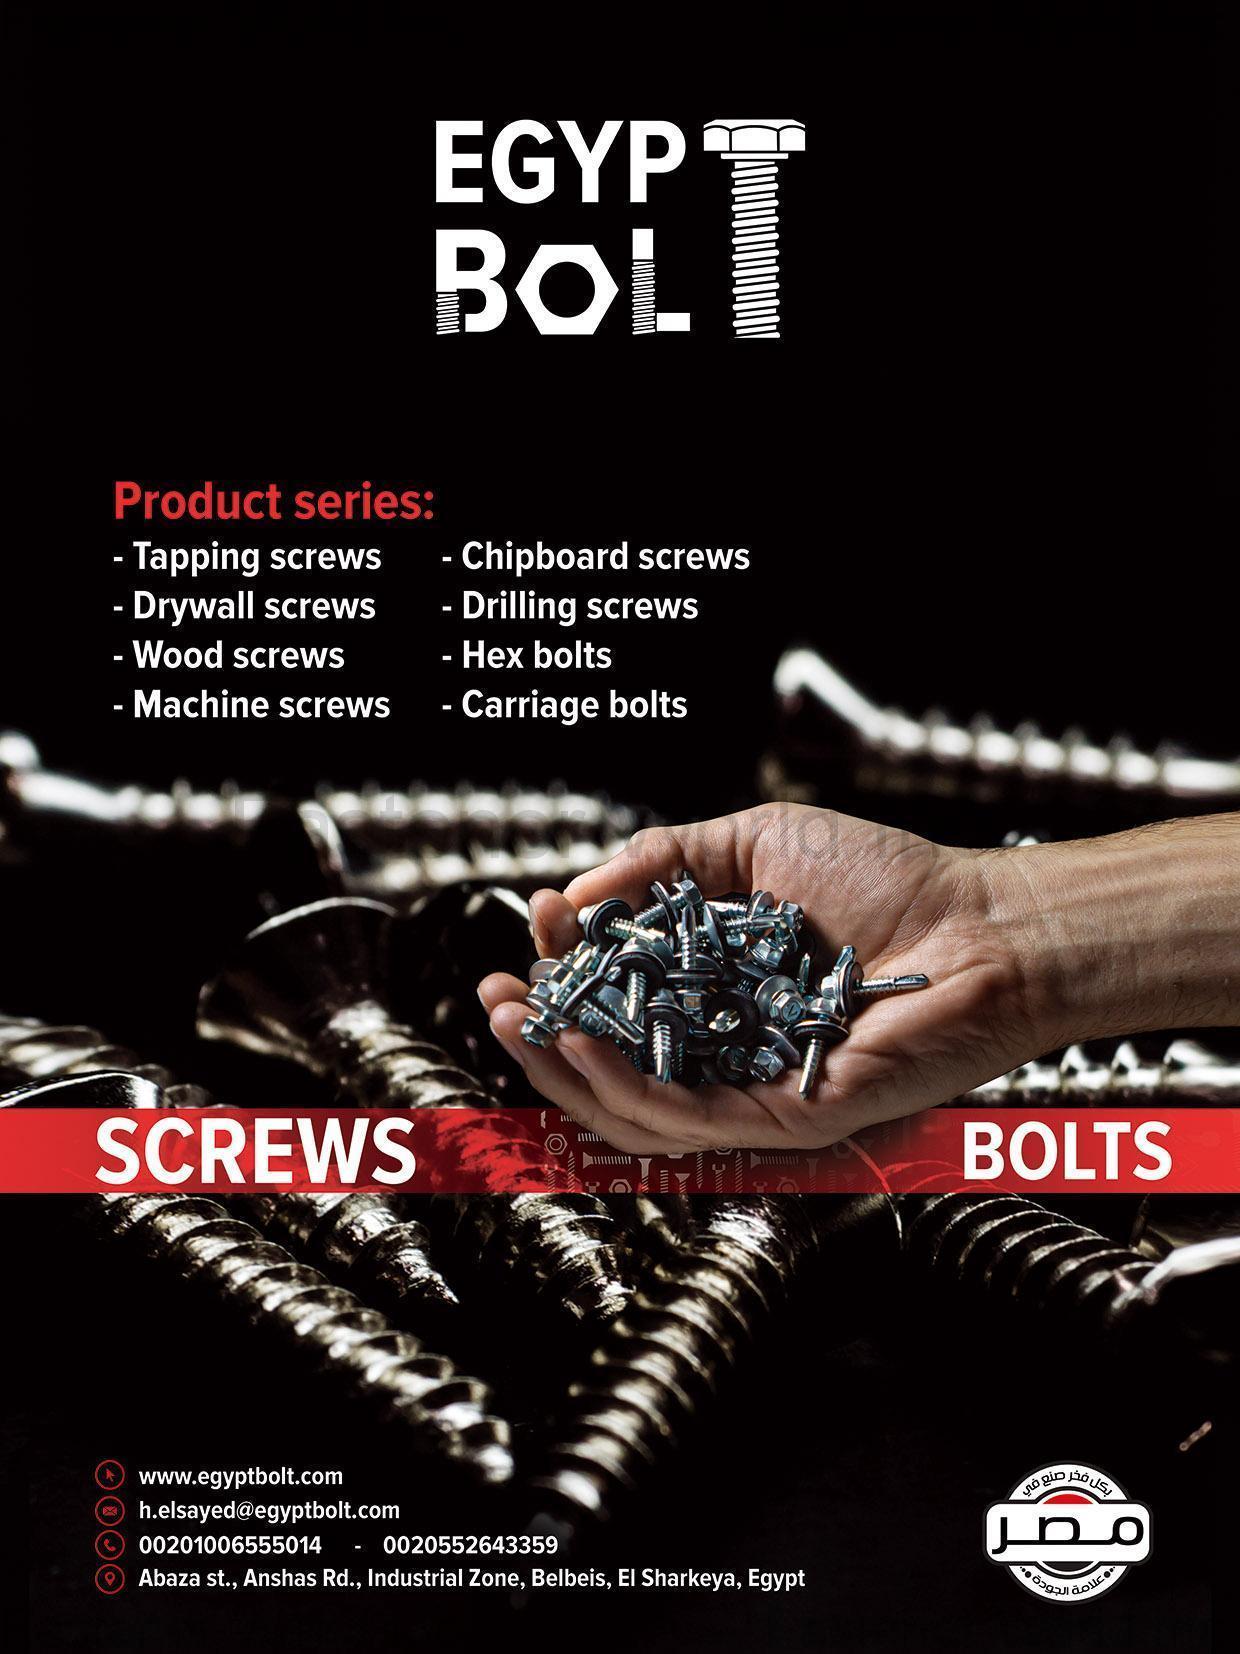 EGYPT BOLT FOR METAL INDUSTRIES , Tapping Screws, Chipboard Screws, Drywall Screws, Drilling Screws, Wood Screws, Hex Bolts, Machine Screws, Carriage Bolts